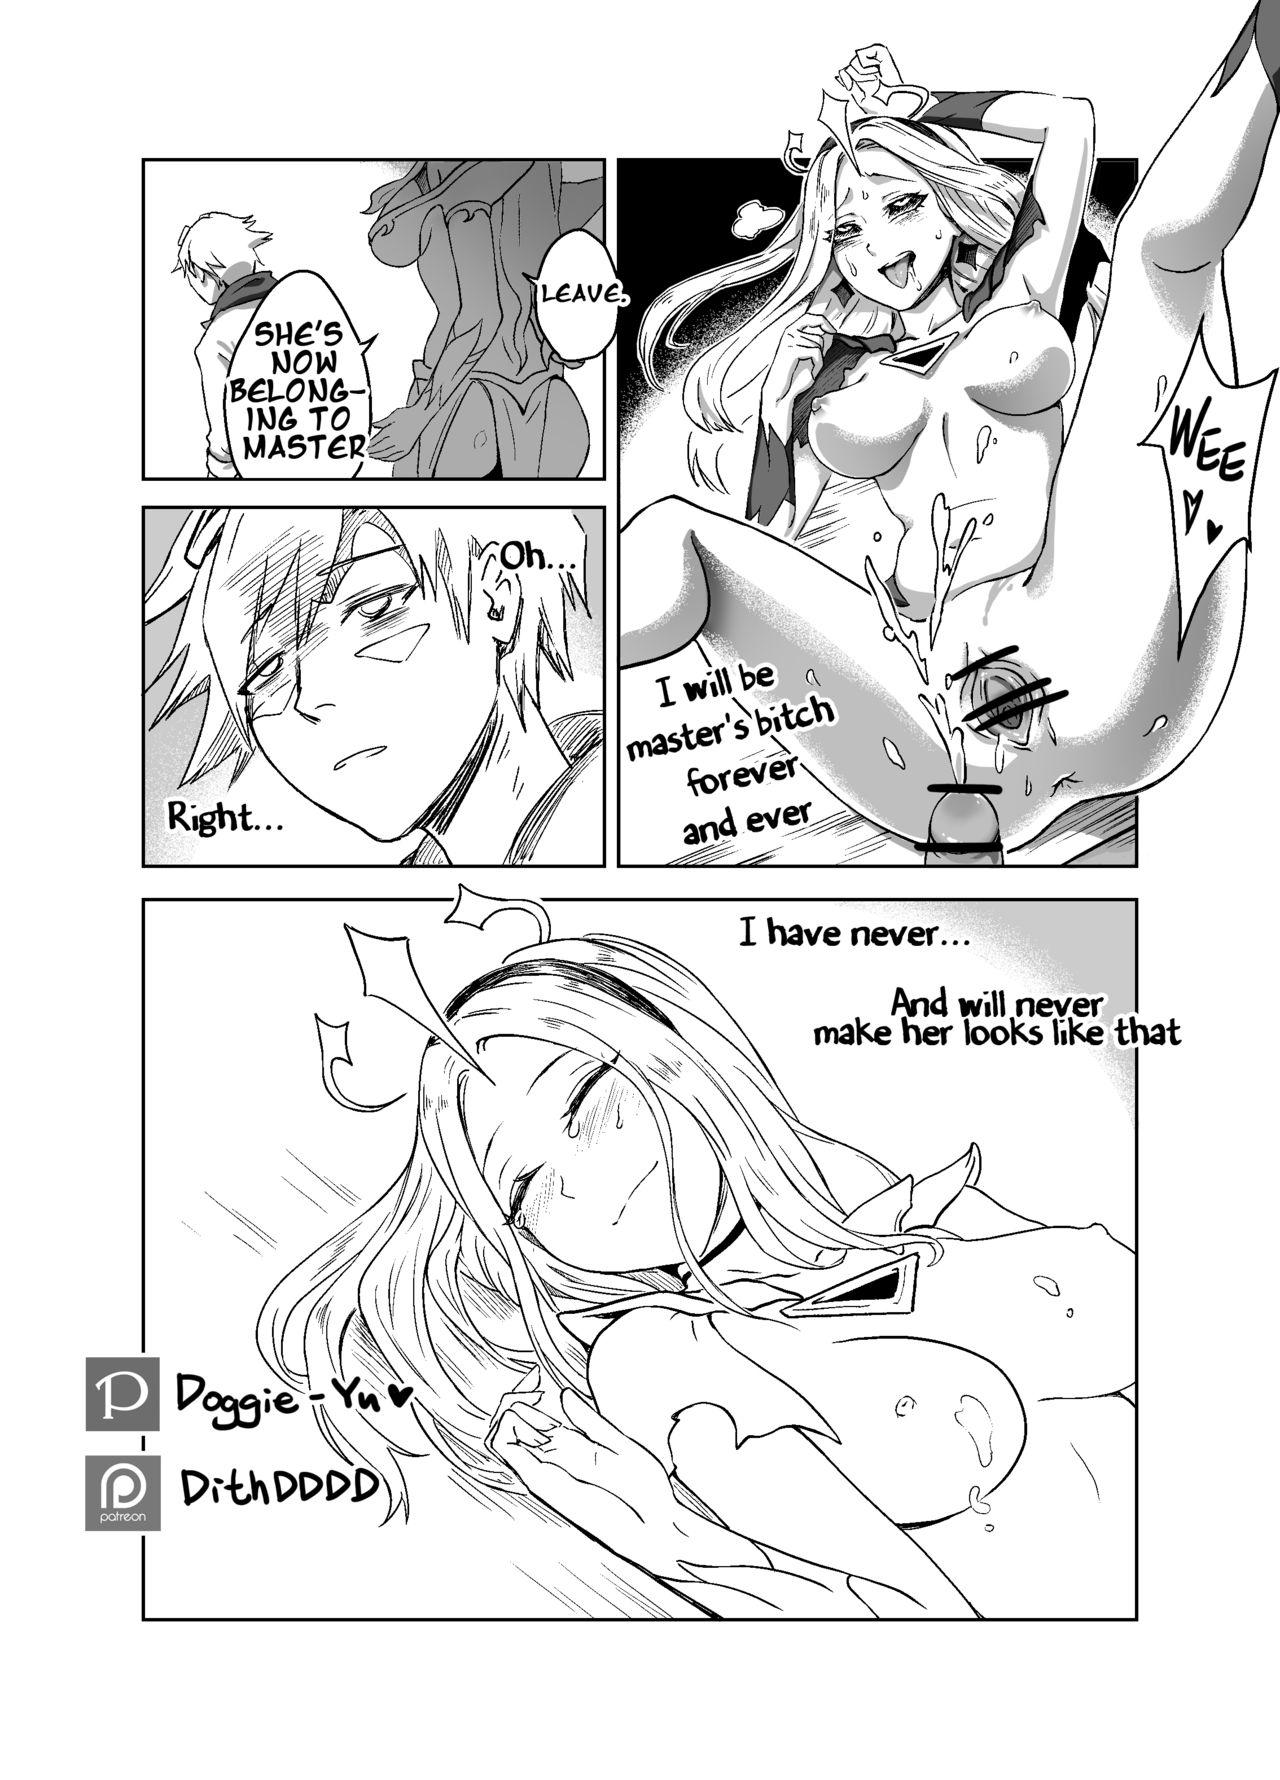 Tease Lux x Viego ft. Ezreal - League of legends Milfporn - Page 22